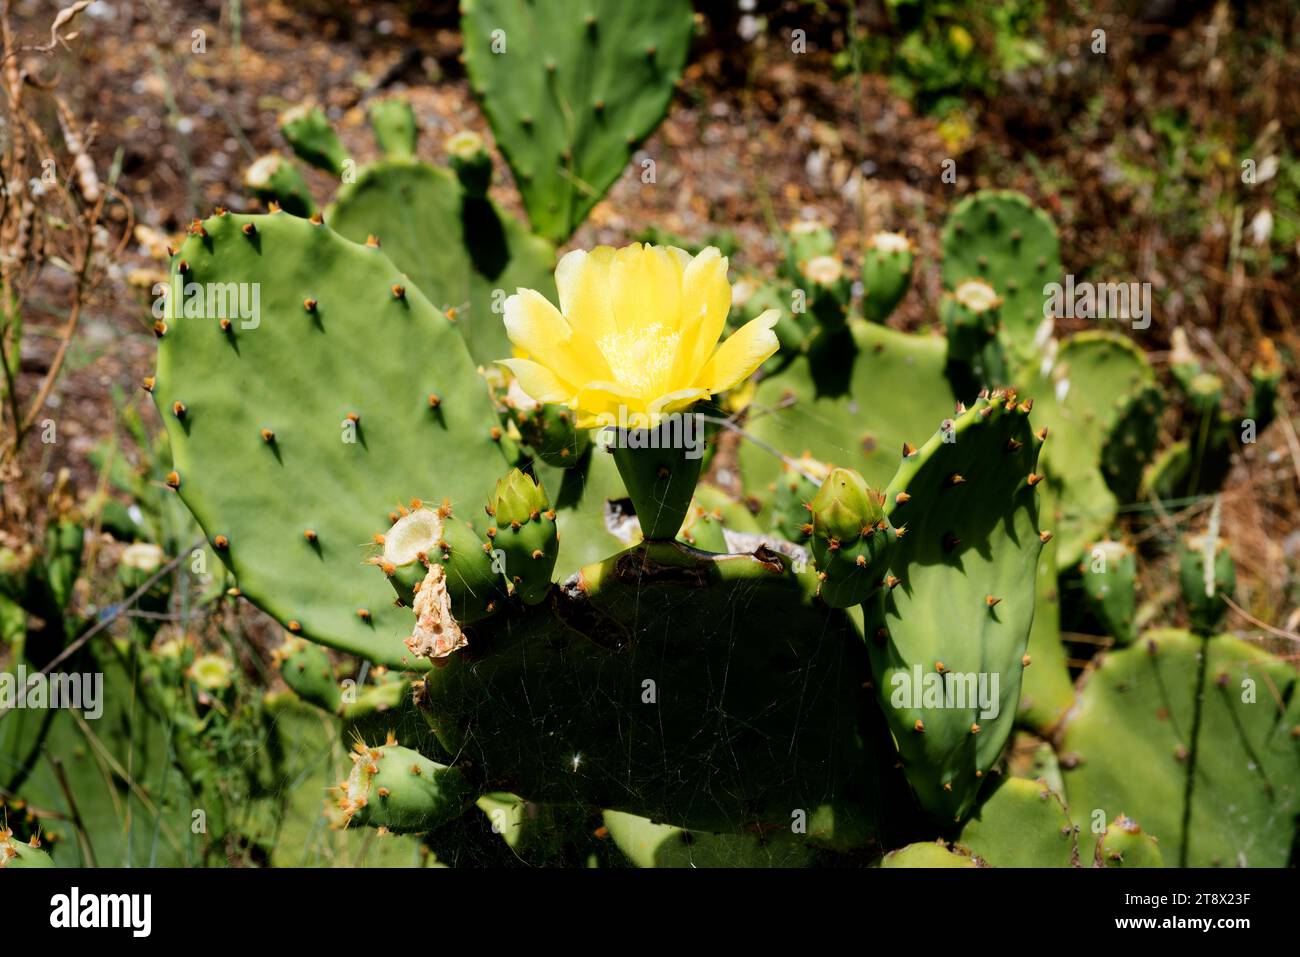 Opuntia dillenii is a cactus native to Mexico, USA and Caribbean Islands but naturalized in many arid or semiarid regions of the World. This photo was Stock Photo